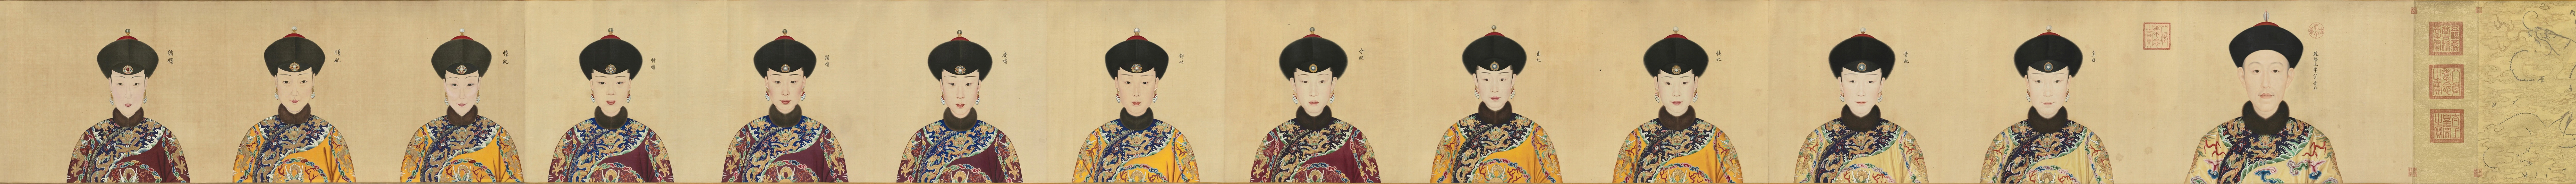 Portraits of Emperor Qianlong, the Empress, and Eleven Imperial Consorts, Giuseppe Castiglione (郎世寧)